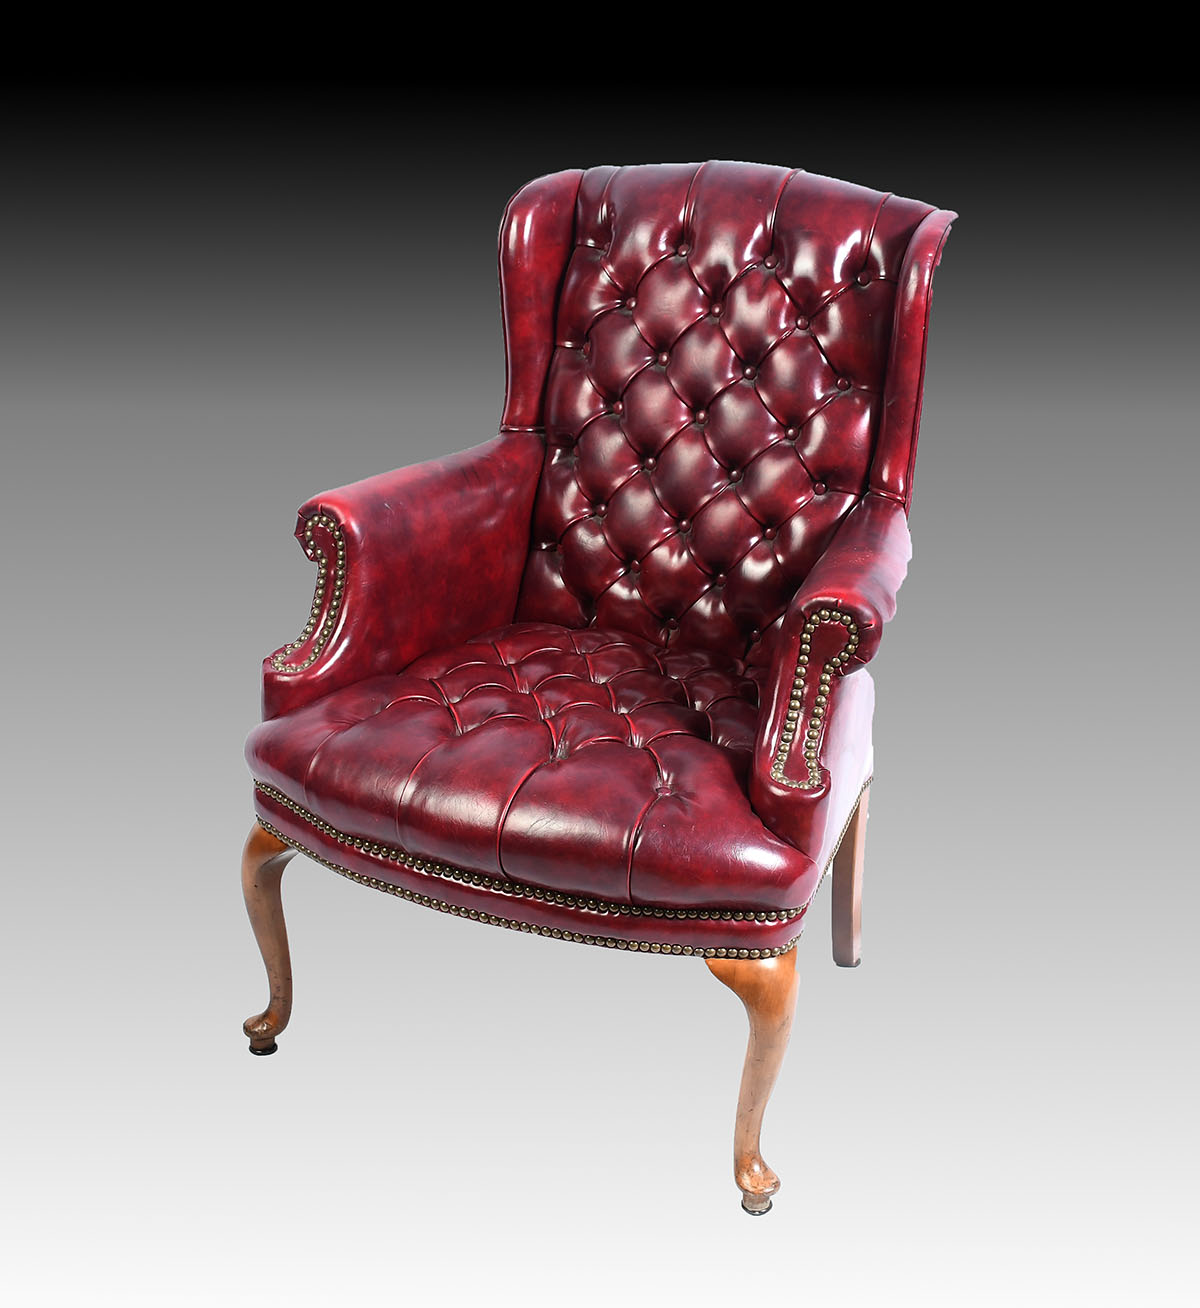 RED LEATHER CHESTERFIELD CHAIR: